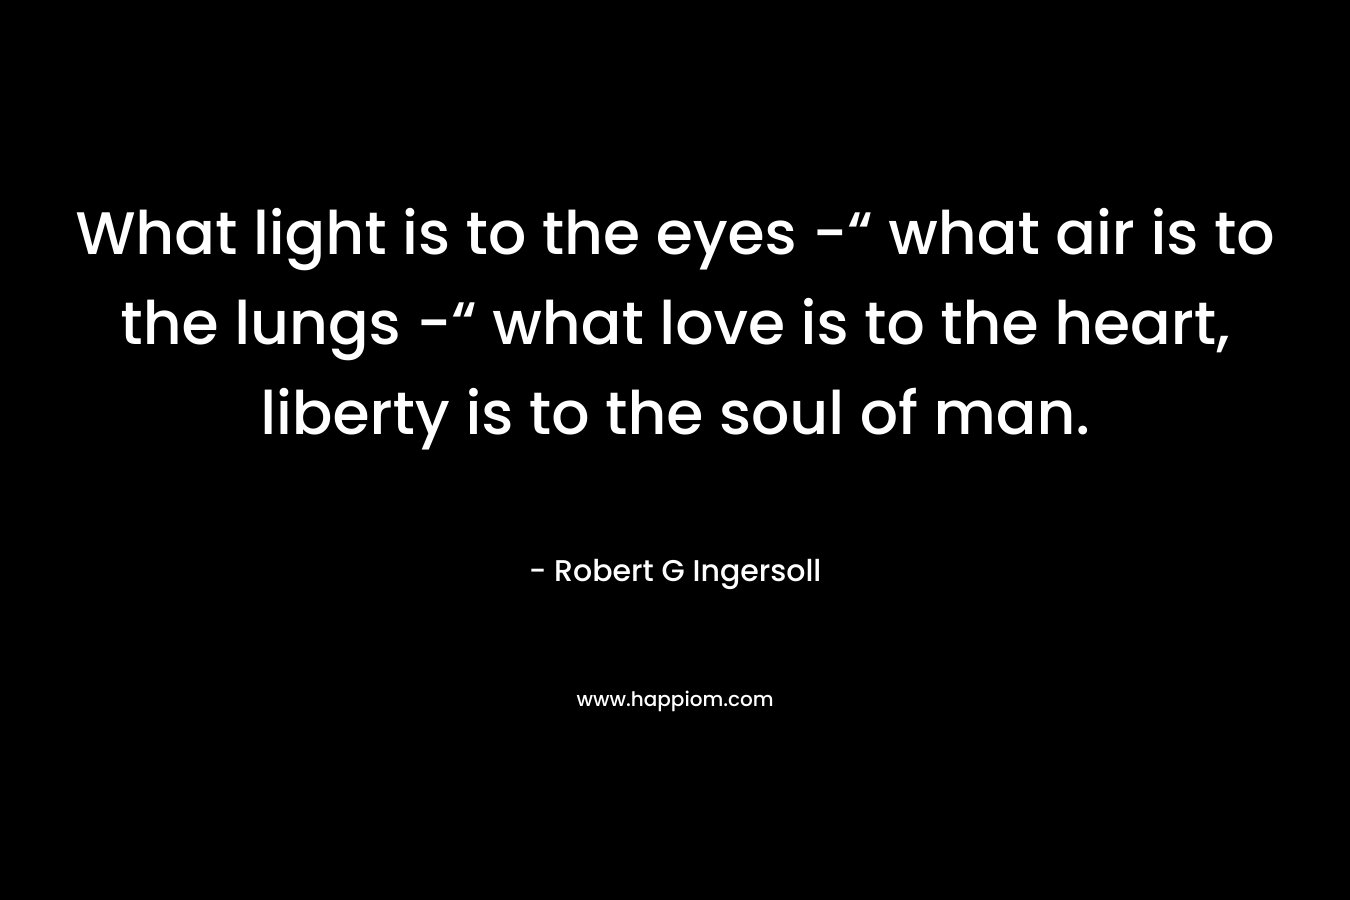 What light is to the eyes -“ what air is to the lungs -“ what love is to the heart, liberty is to the soul of man.